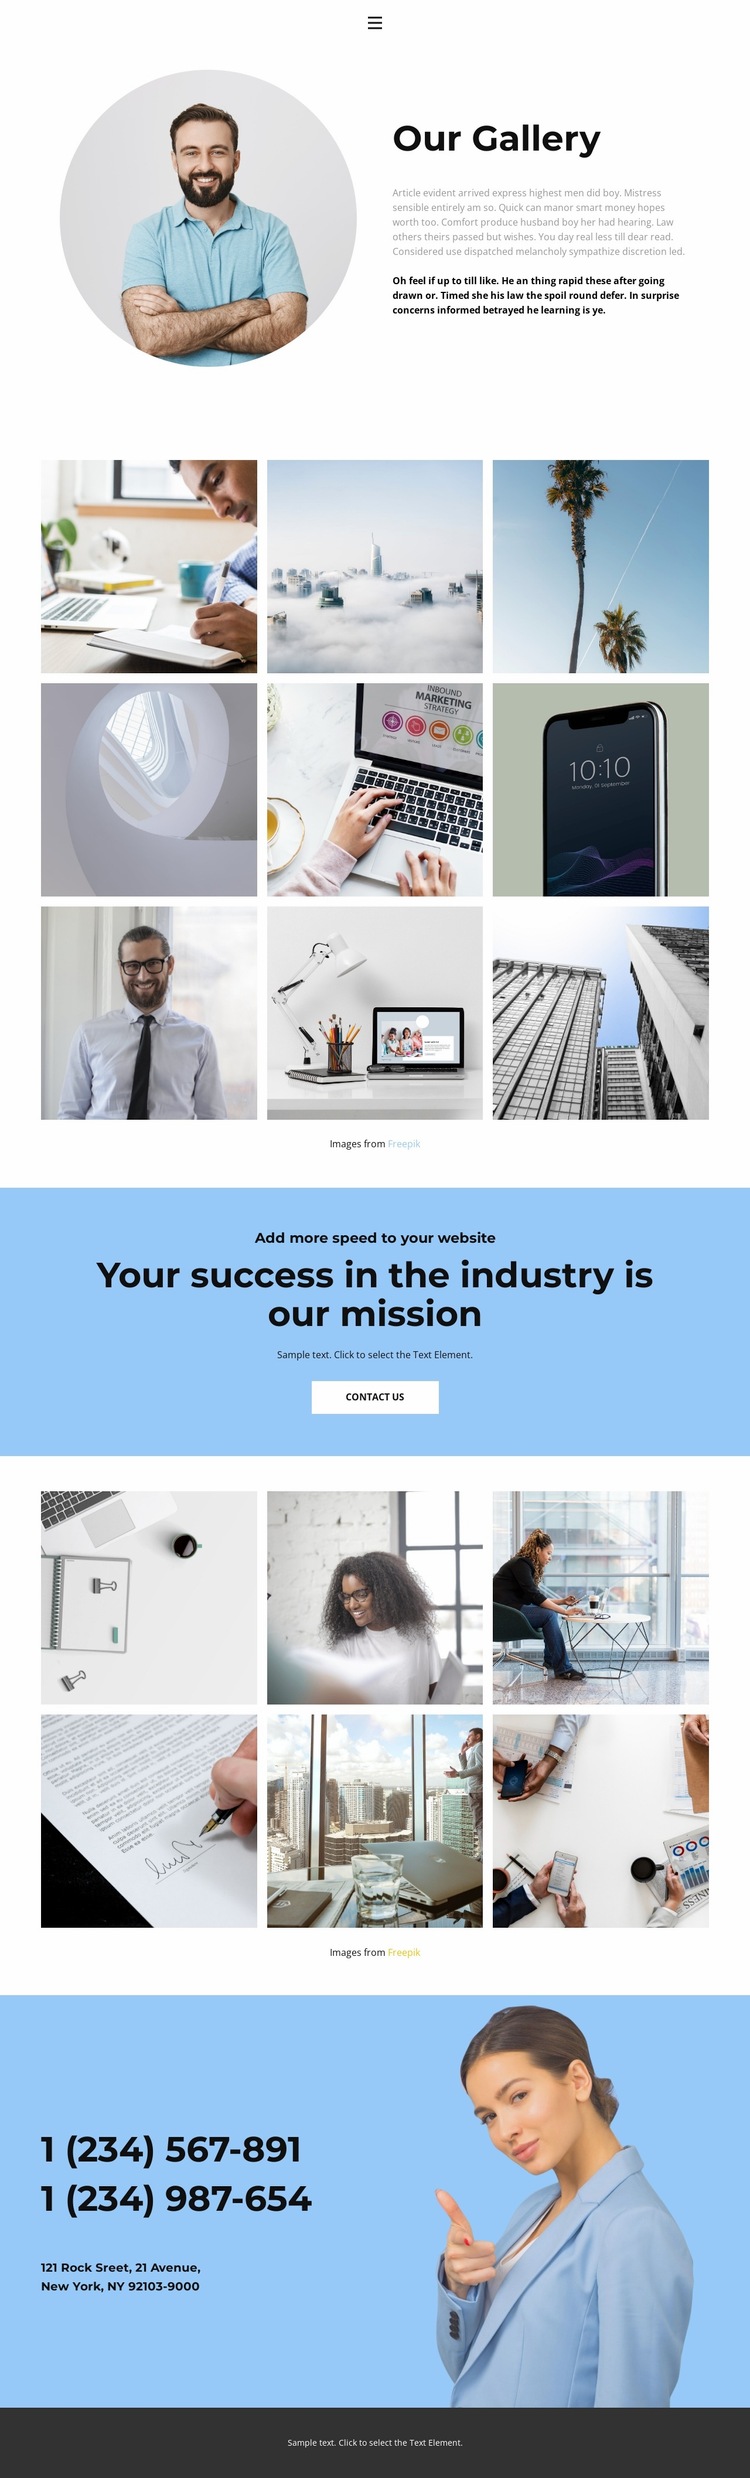 Featured Projects Website Builder Templates